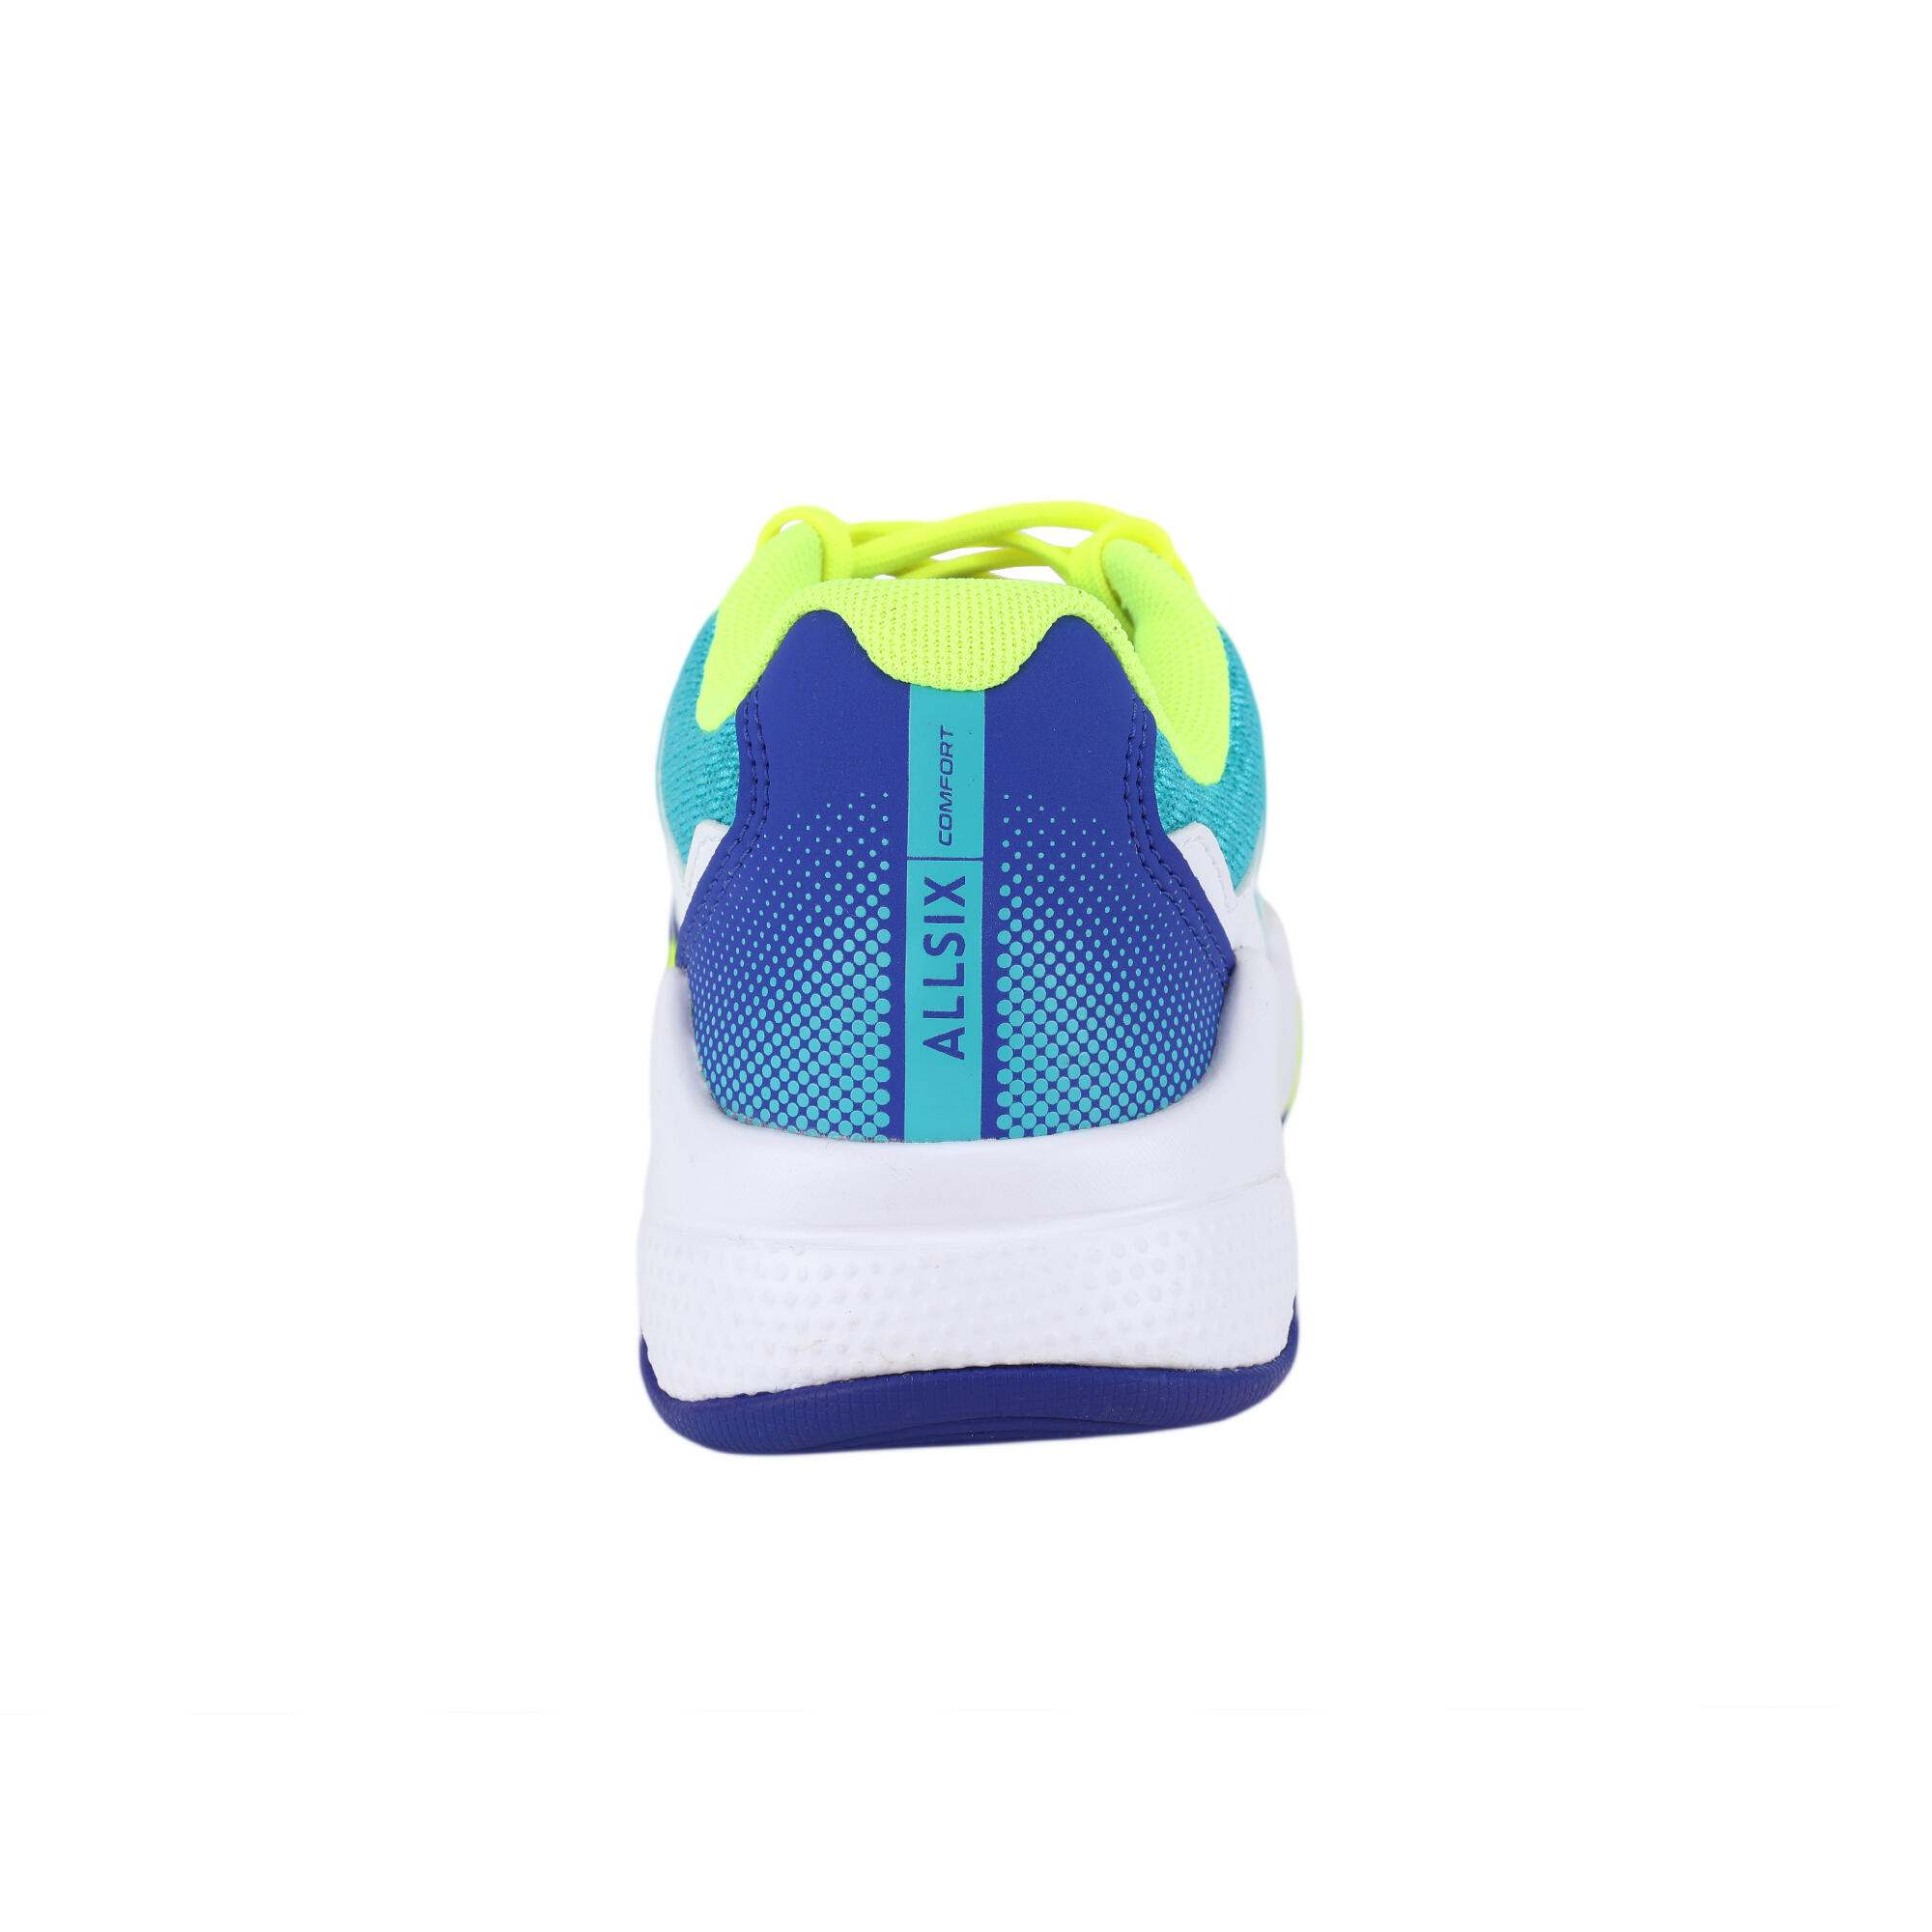 Volleyball Shoes VS100 Comfort With Laces - White/Blue & Green. 4/4